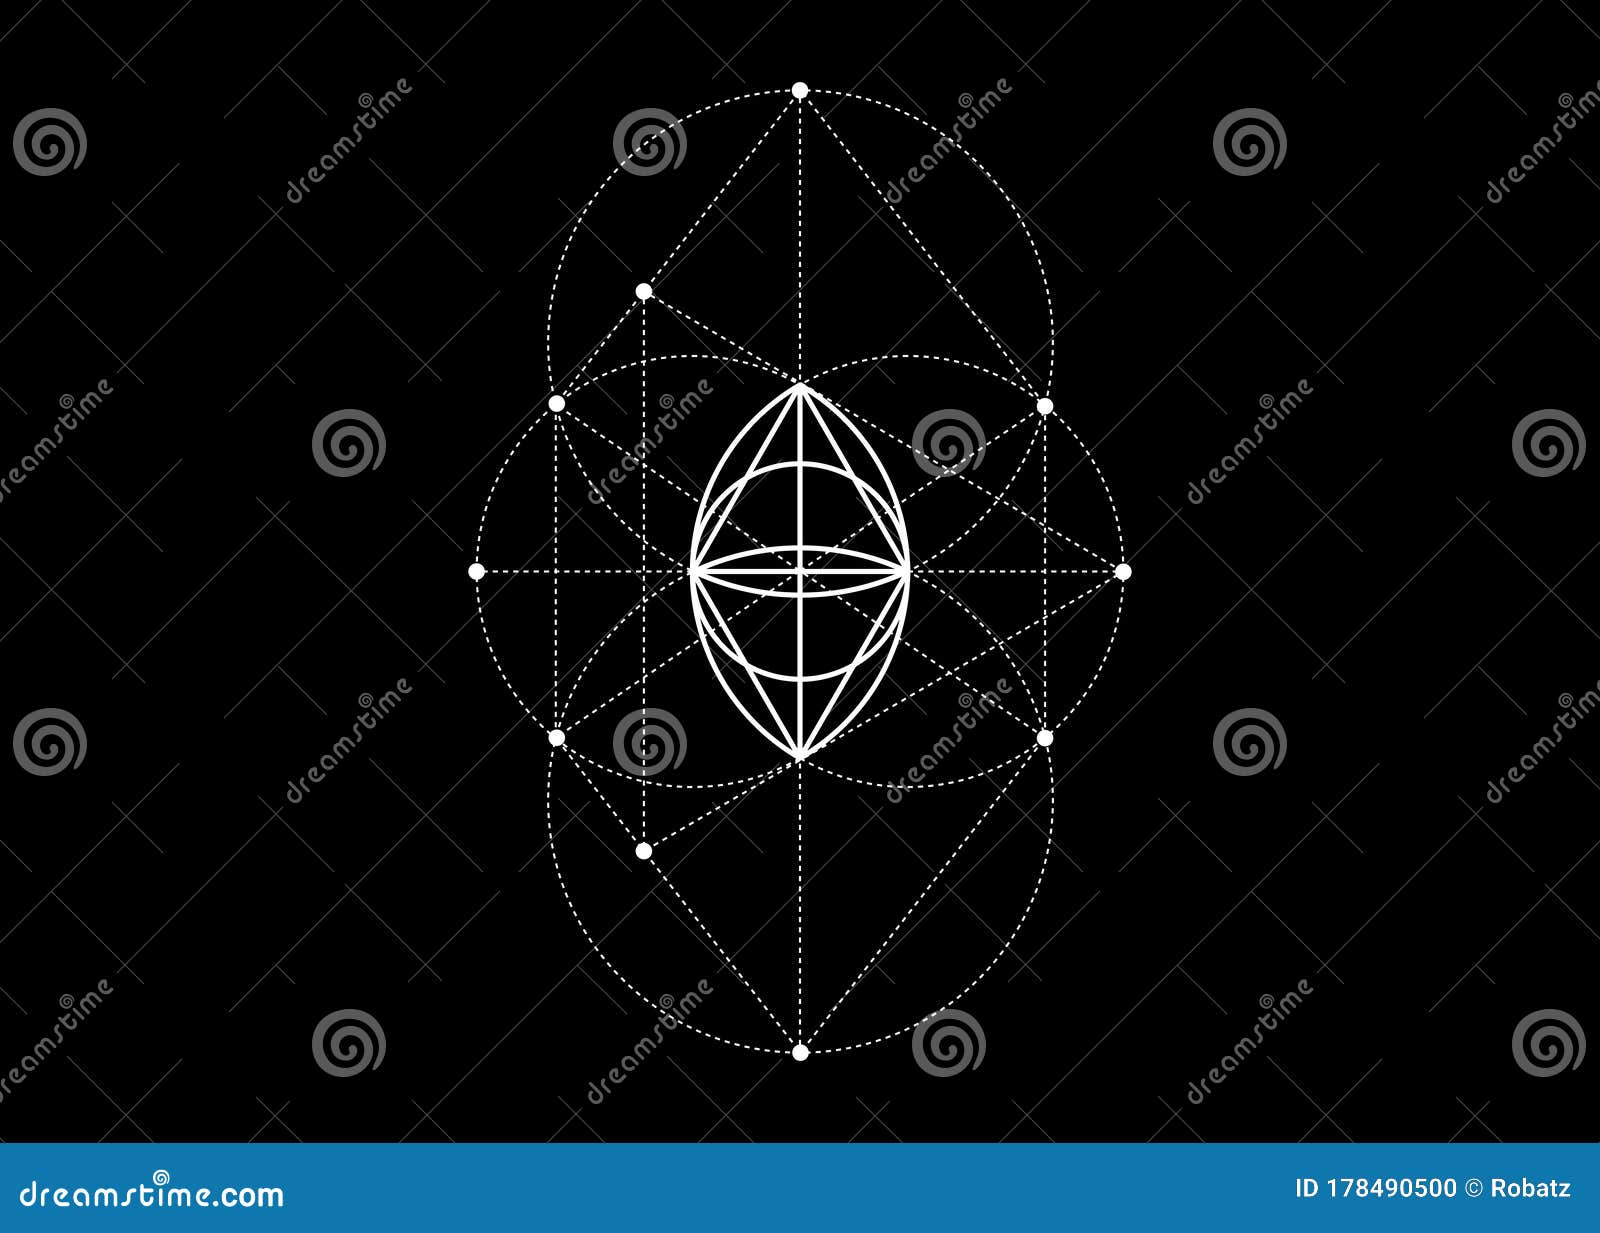 vesica piscis sacred geometry. all seeing eye, the third eye or the eye of providence inside triangle pyramid. the eye of phi sign